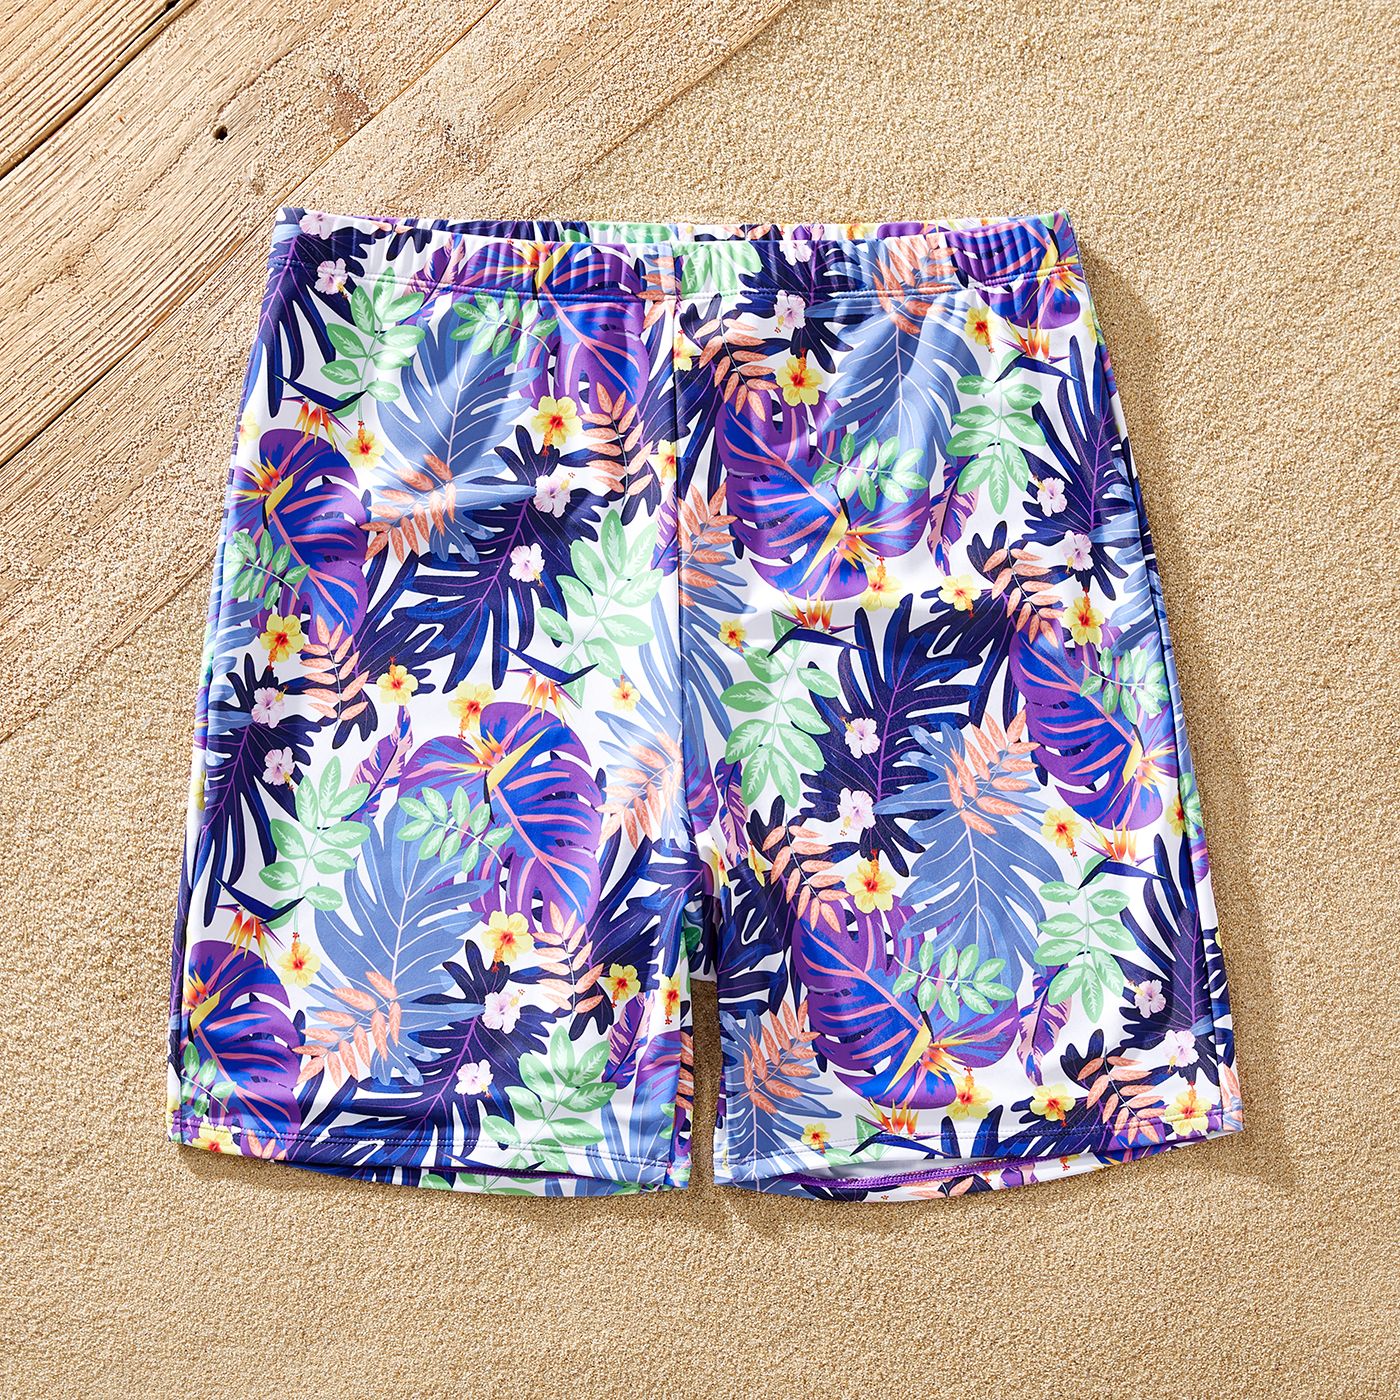 Family Matching Plant Print Ruffled One-piece Swimsuit Or Swim Trunks Shorts